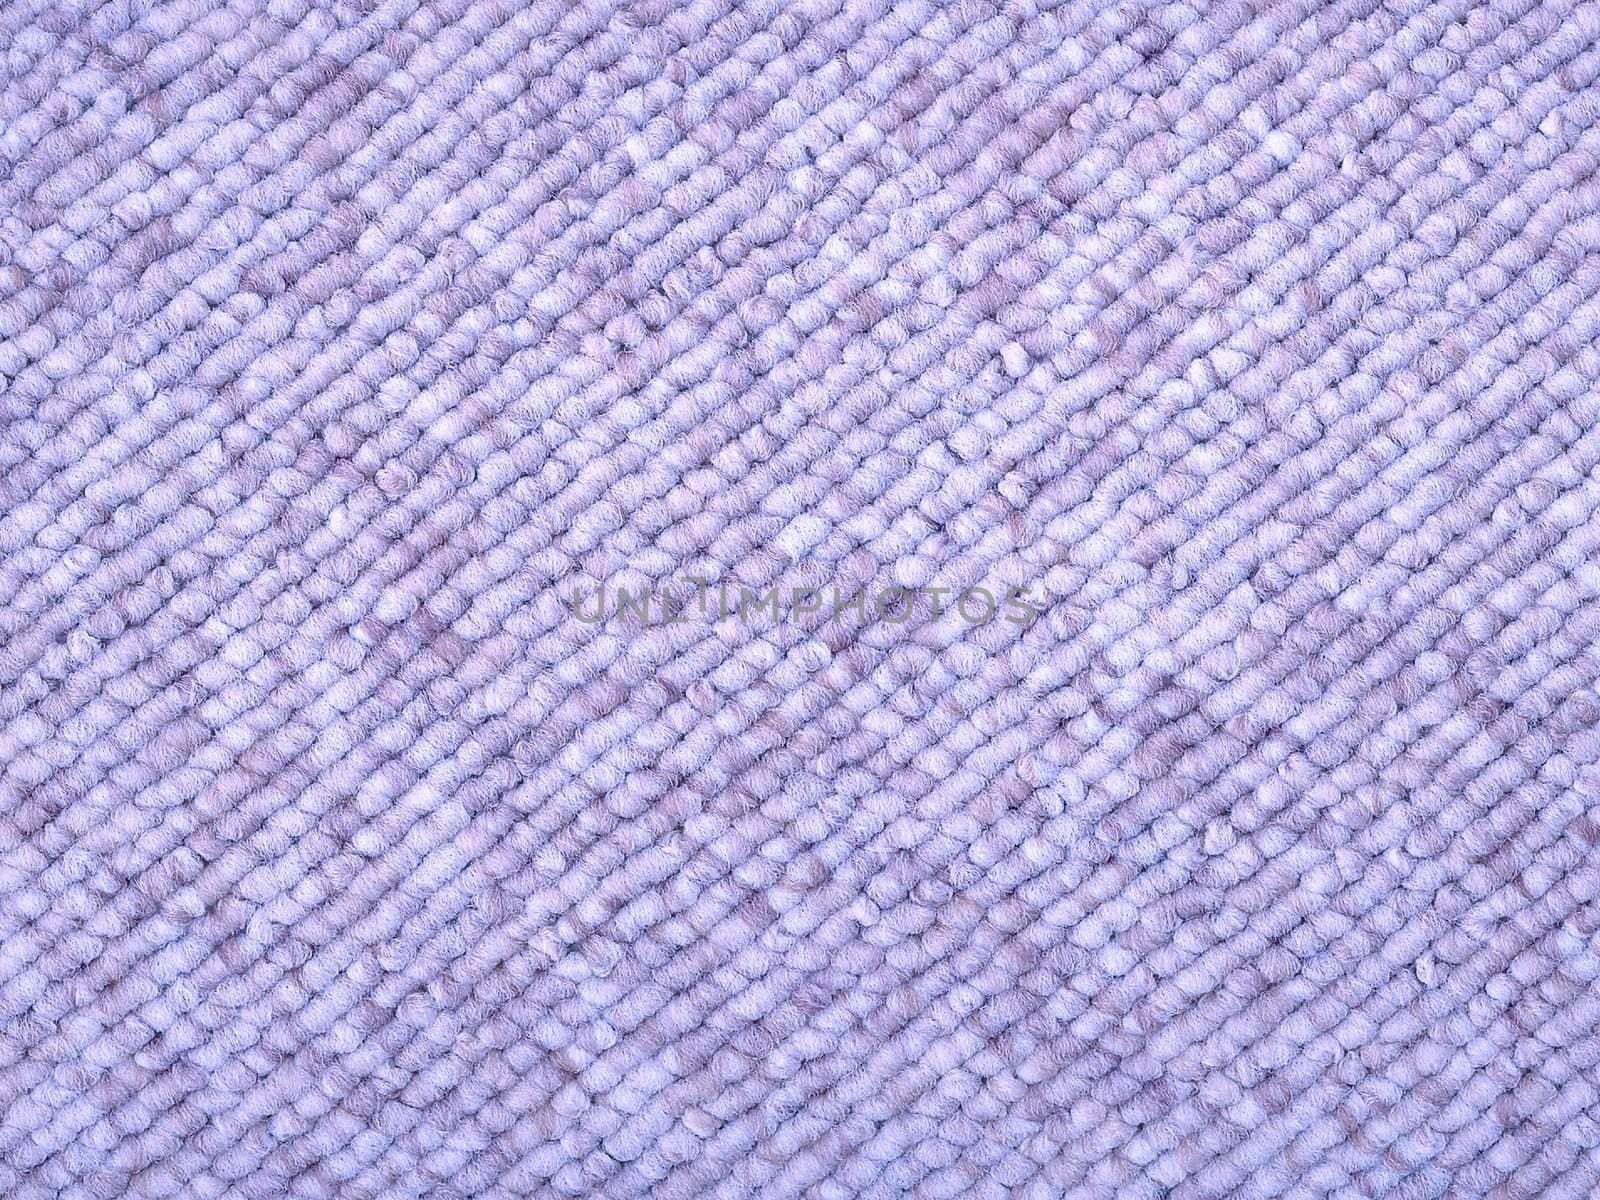 Loop-Woven Carpet, sample piece by Nonboe